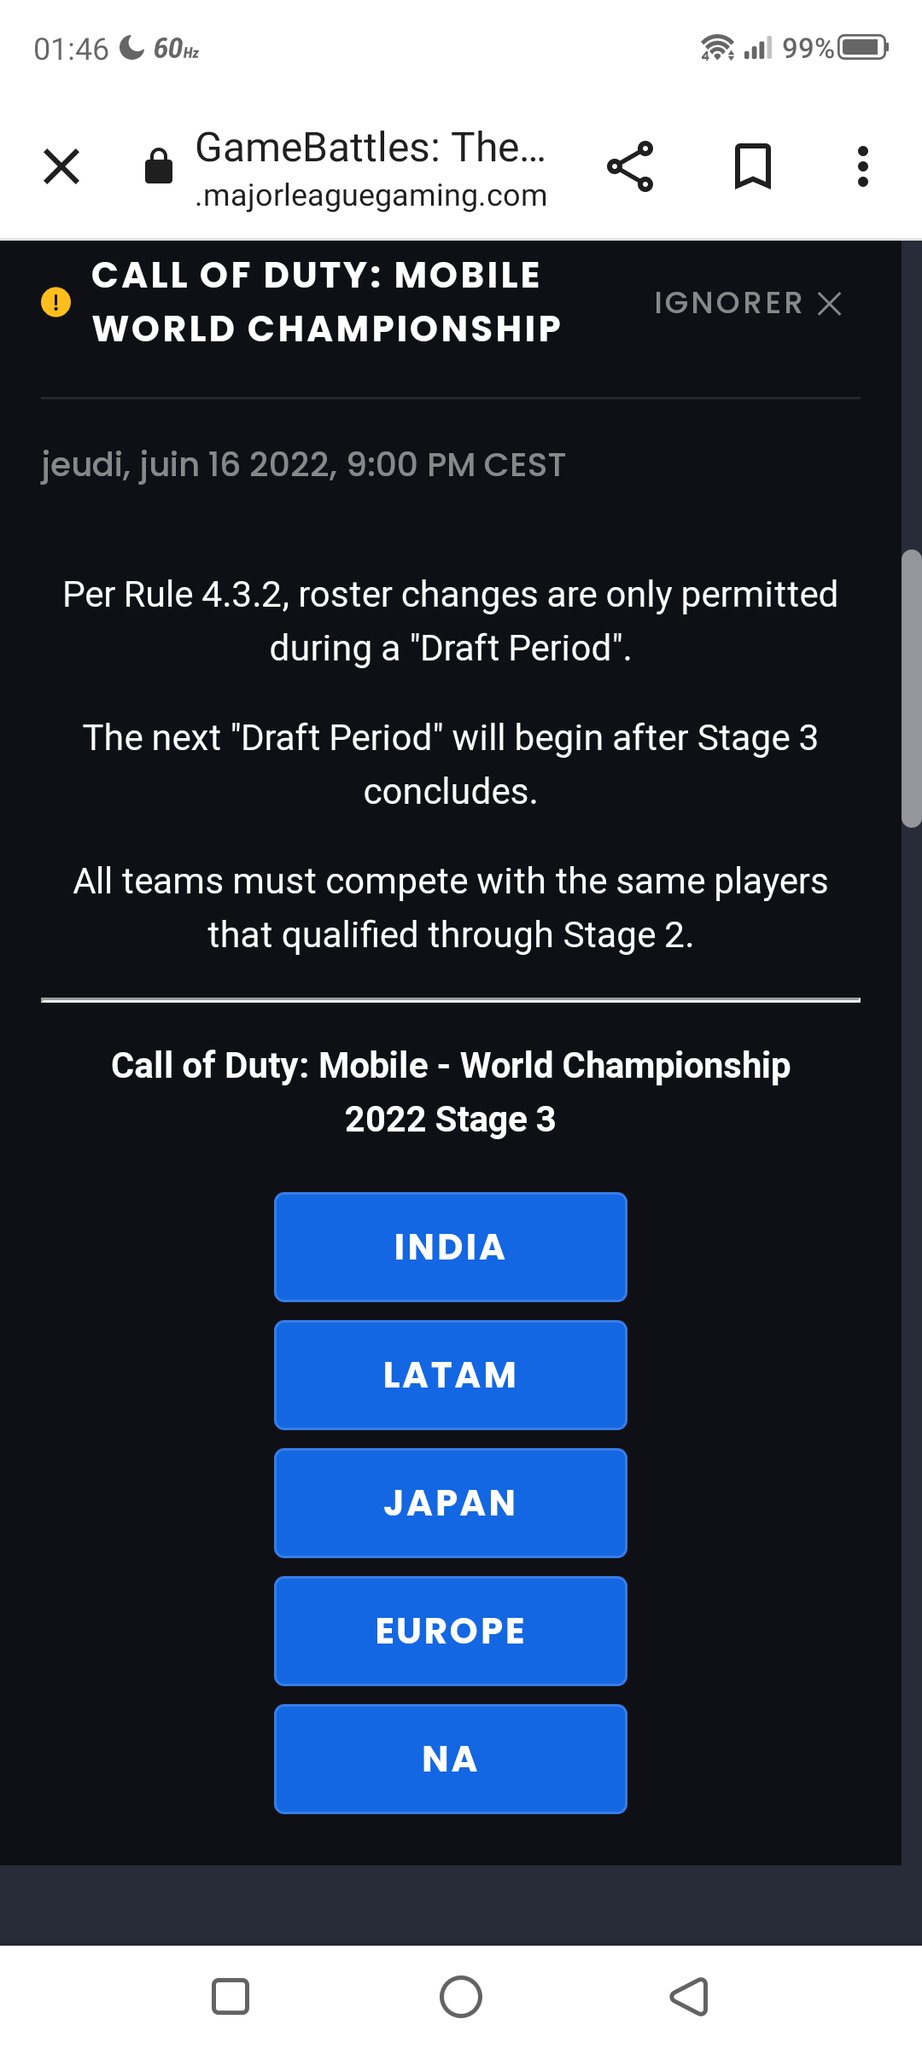 2️⃣ Stage 2 of the #CODMobile World - Call of Duty: Mobile